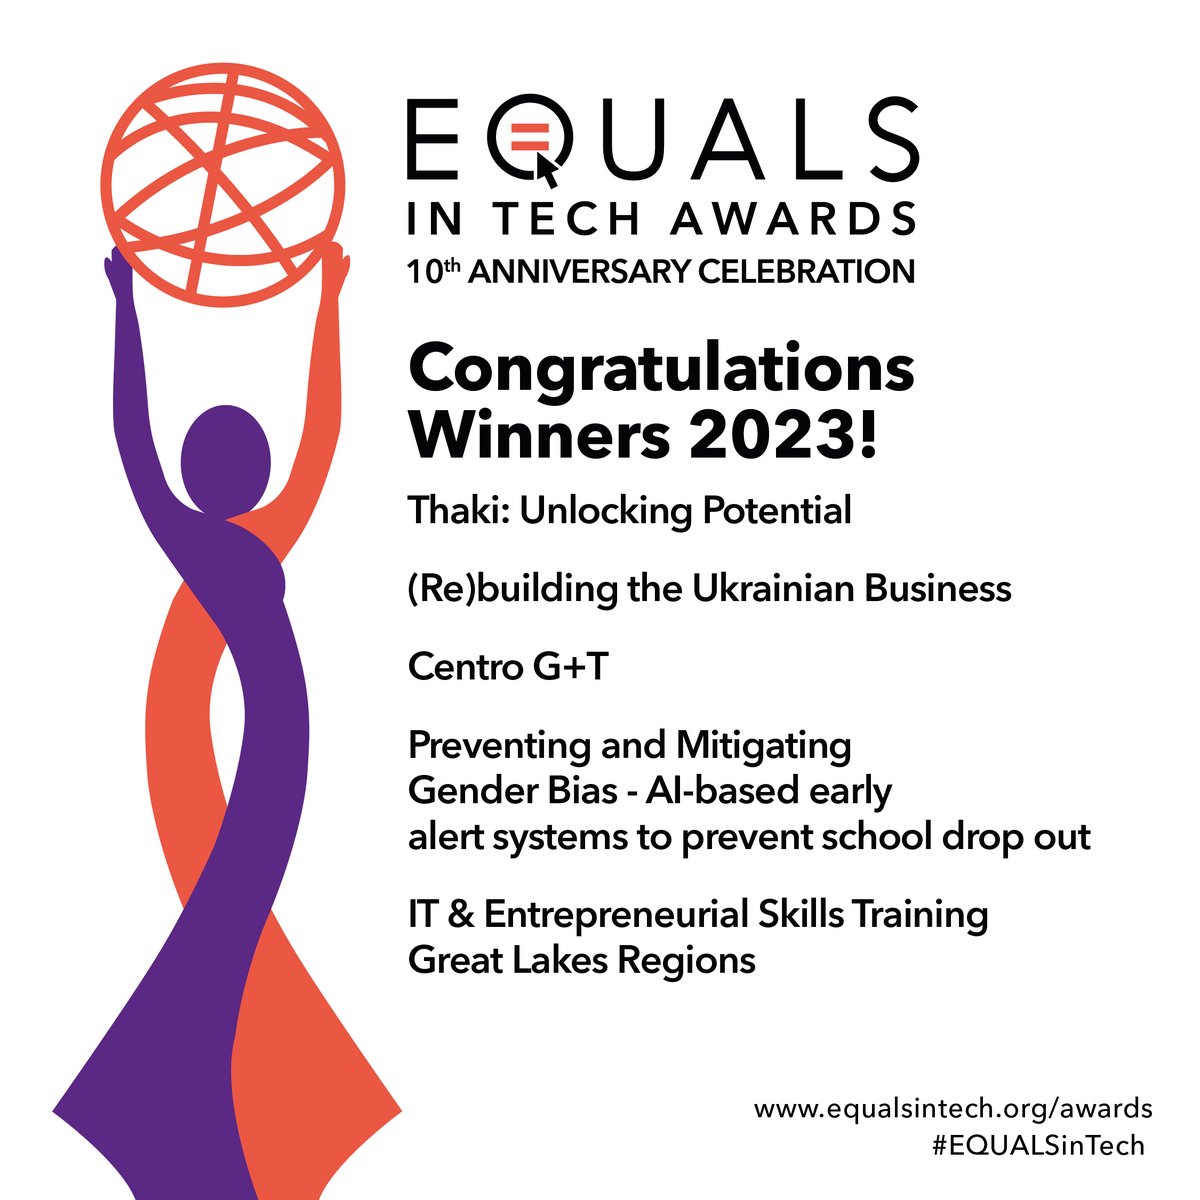 Congratulations to @codetochange for winning the EQUALS Partner Special Recognition Award! Congratulations to the inspiring winners of the 2023 #EQUALSinTech Awards in all categories! Learn more: equalsintech.org/awards